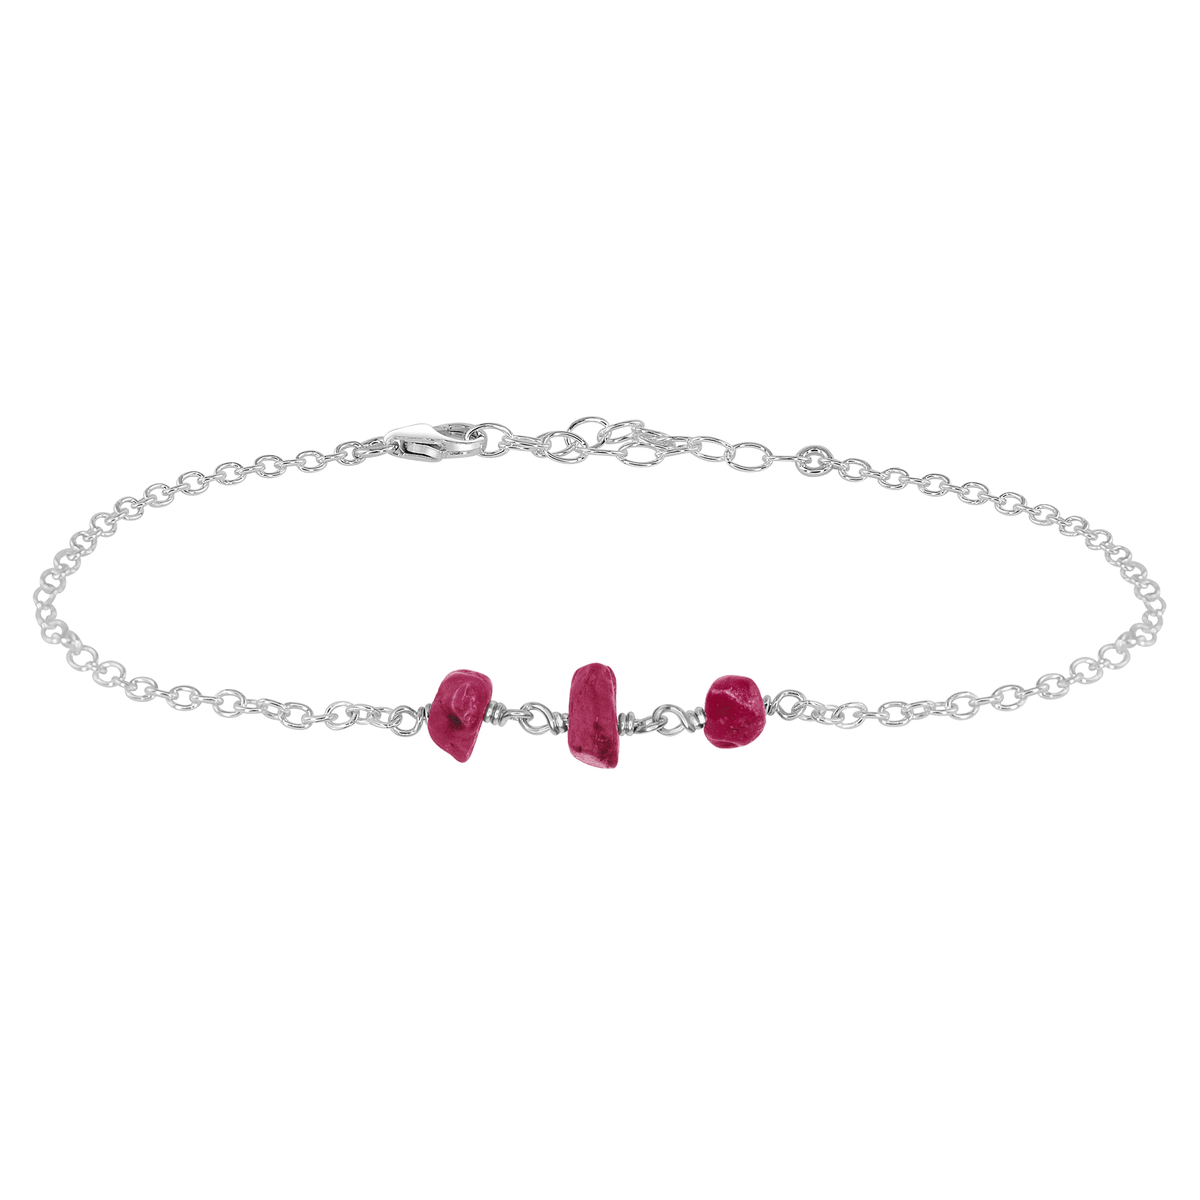 Beaded Chain Anklet - Ruby - Sterling Silver - Luna Tide Handmade Jewellery